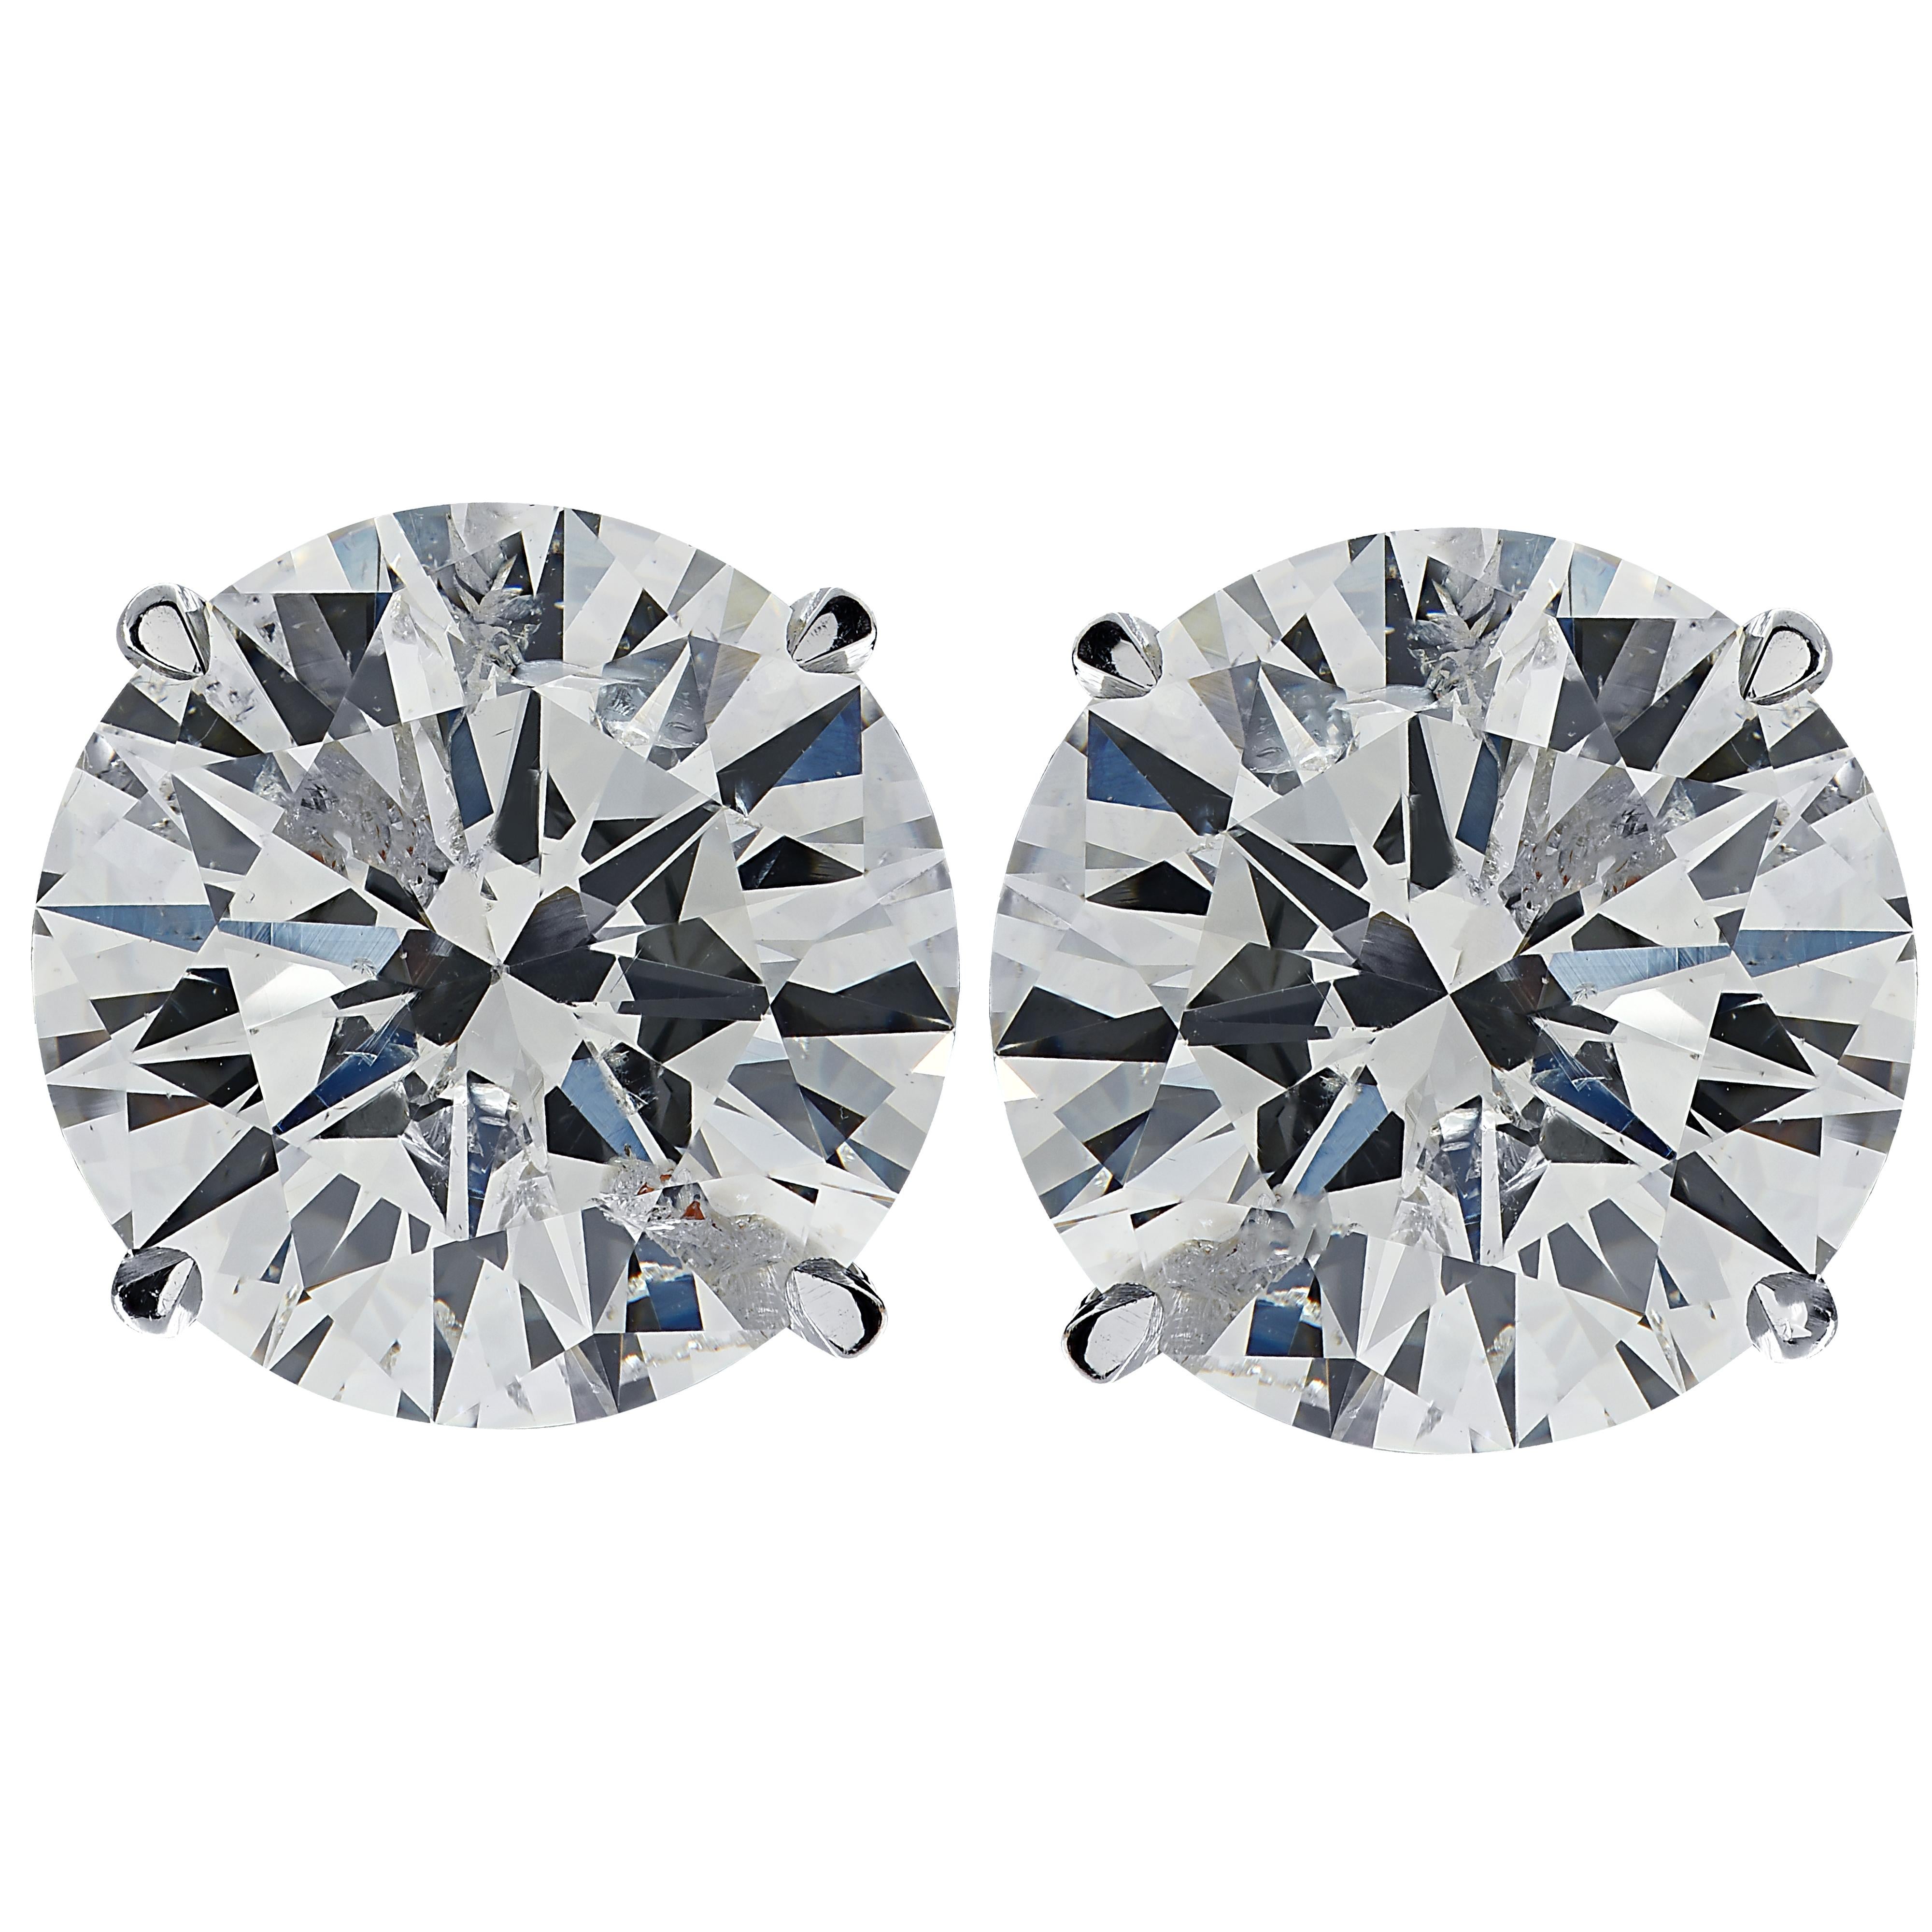 Stunning Vivid Diamonds solitaire stud earrings crafted by hand in platinum, showcasing 2 spectacular GIA Certified round brilliant cut diamonds weighing 3.57 carats total, D-E color SI2 clarity. These diamonds were carefully selected and perfectly